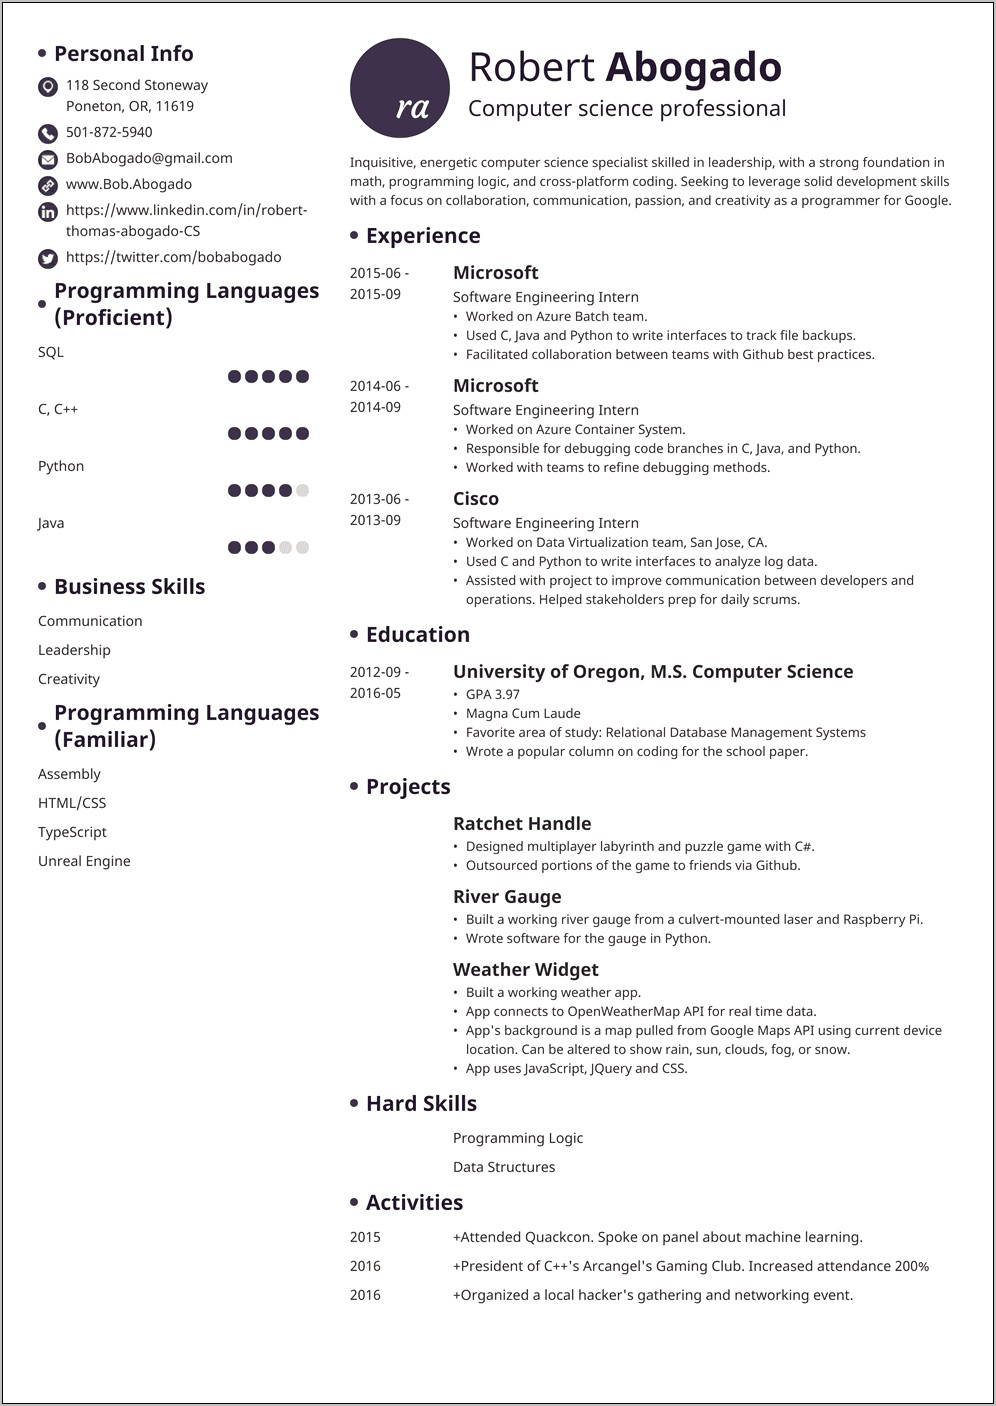 Professional Summary For Computer Science Resume